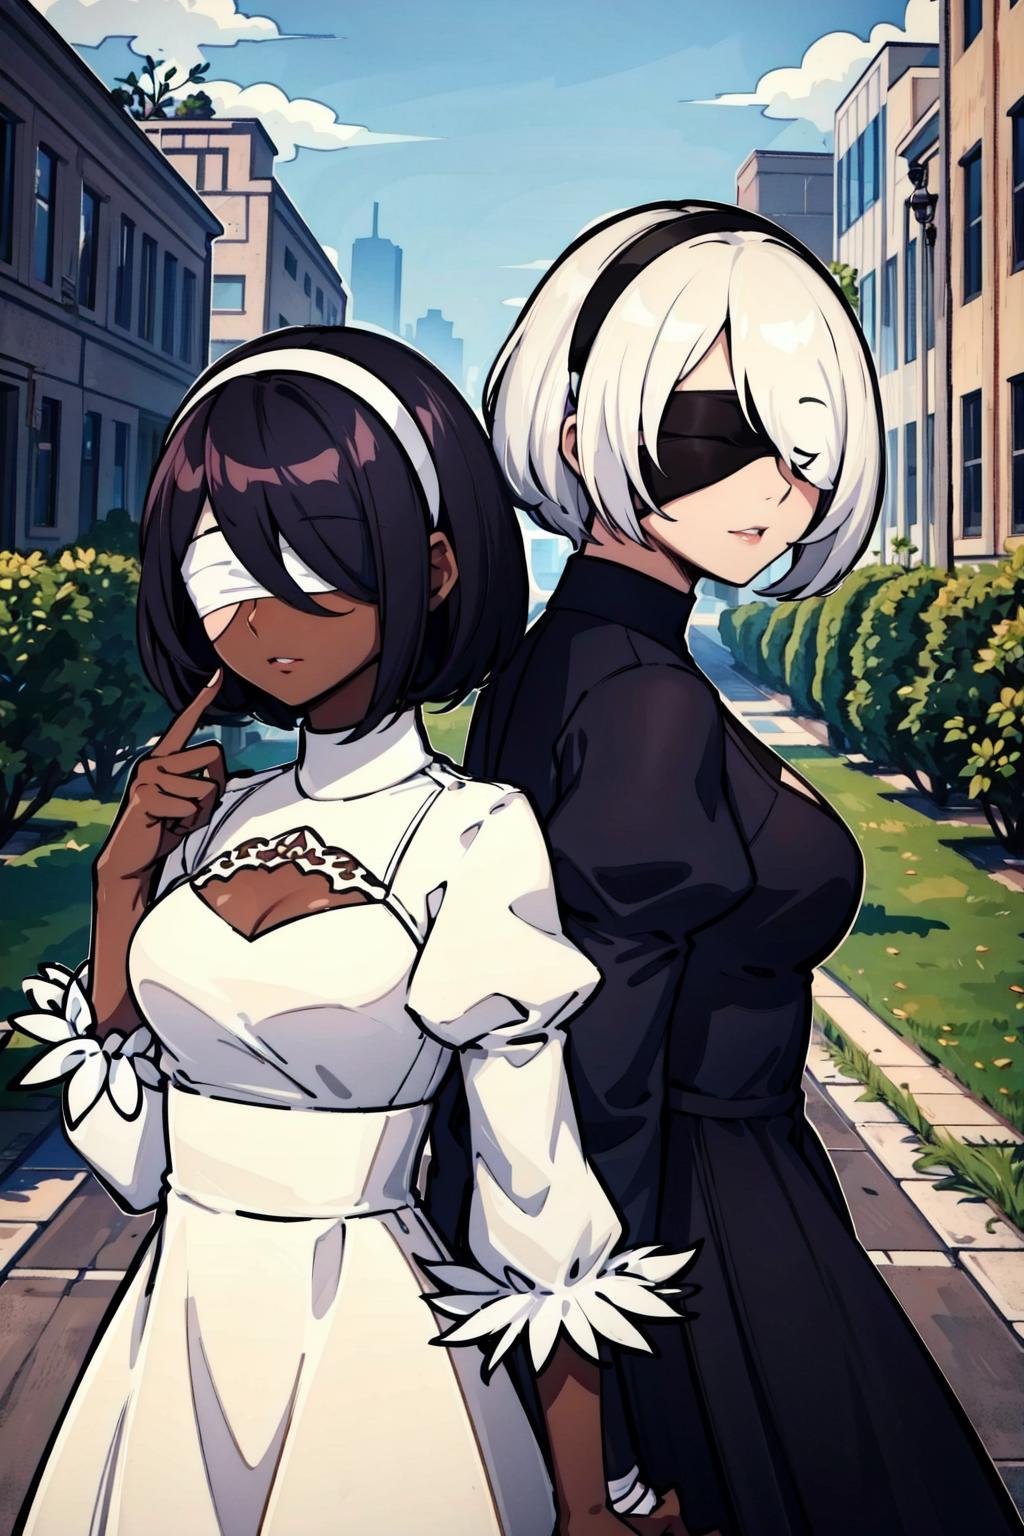 2girls, back-to-back, (ruins), post-apocalypse, overgrown city,(best quality, masterpiece)AND 2girls, back-to-back, (ruins), post-apocalypse, overgrown city,(best quality, masterpiece)  (y2p, dark skin:1.3,black hair, white hairband, white blindfold:1.4,blindfold:1.3,eyes covered, white dress,juliet sleeves, white gloves:1.2,short hair, hair over one eye,feather-trimmed sleeves,long sleeves) <lora:y2p_v1:1>AND 2girls, back-to-back, (ruins), post-apocalypse, overgrown city,(best quality, masterpiece)  (yorha no. 2 type b,white hair,  black hairband, black blindfold:1.3,blindfold:1.2, black dress, juliet sleeves, black gloves:1.2,long sleeves, hair over one eye,feather-trimmed sleeves,pale skin )